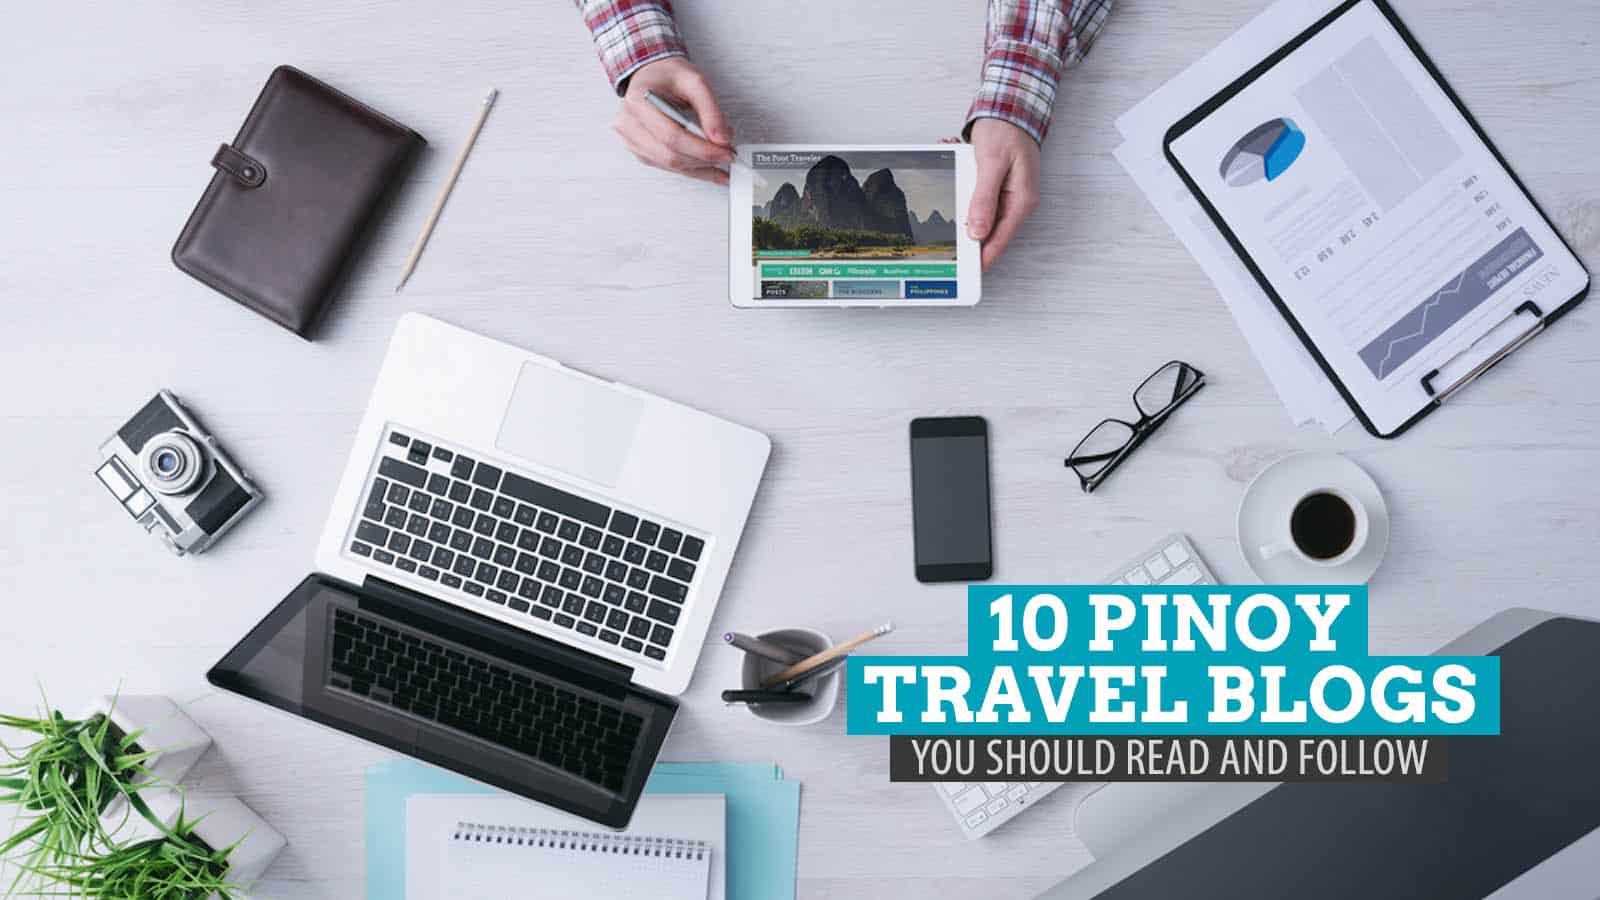 10 Philippine Travel Blogs You Should Read and Follow